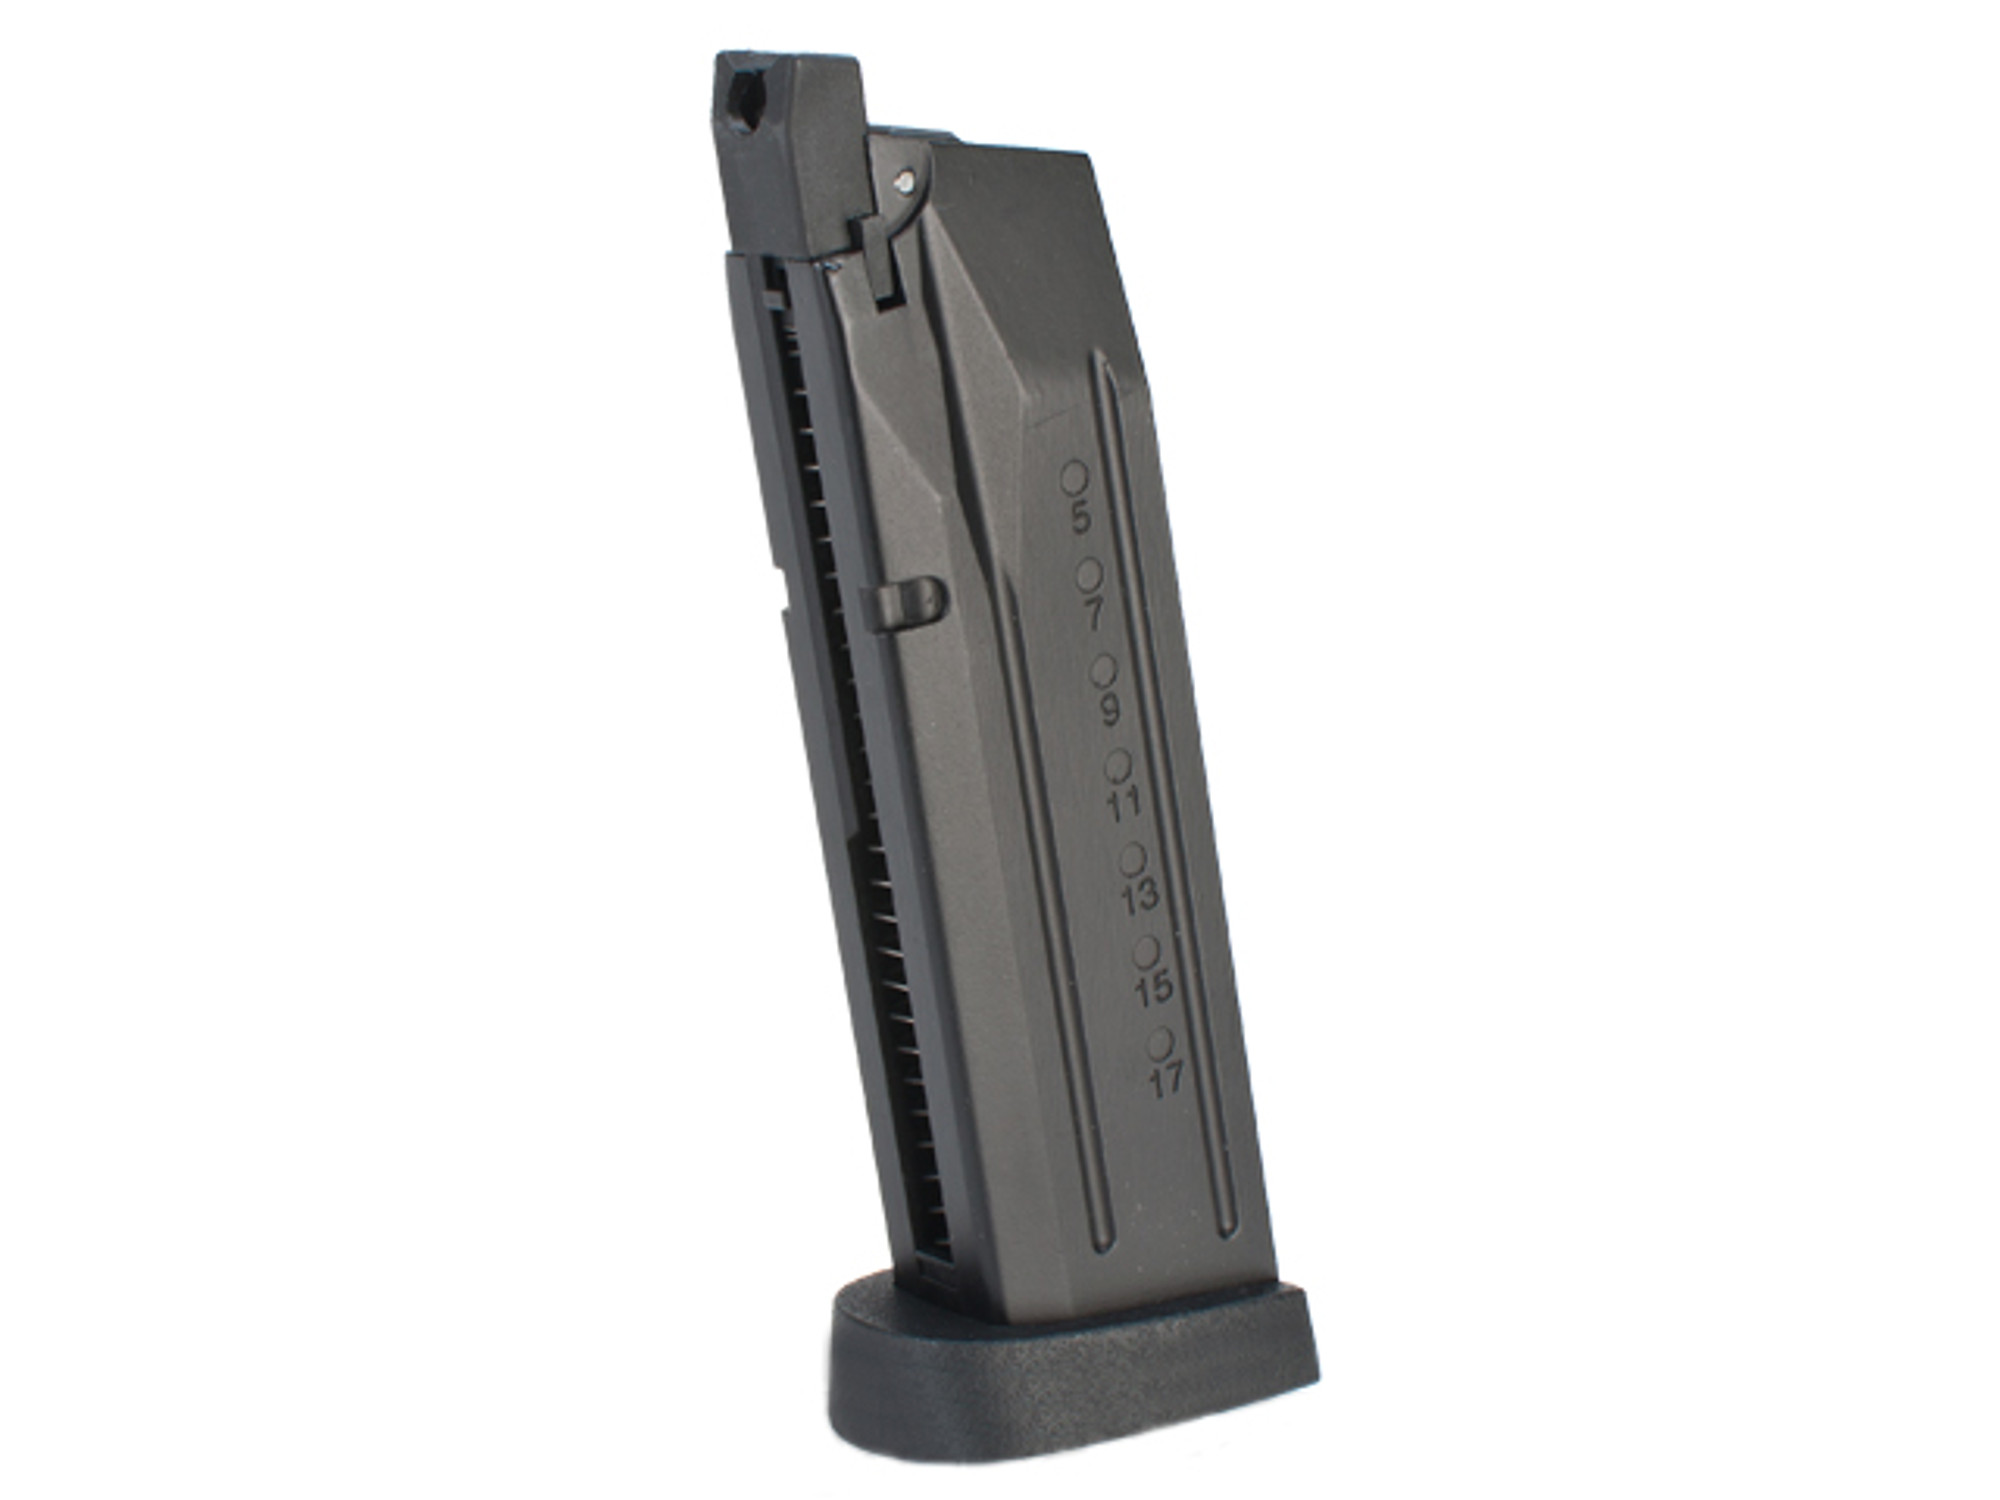 WE-Tech 25rd CO2 Magazine Kit for WE Toucan Series Airsoft GBB Pistols